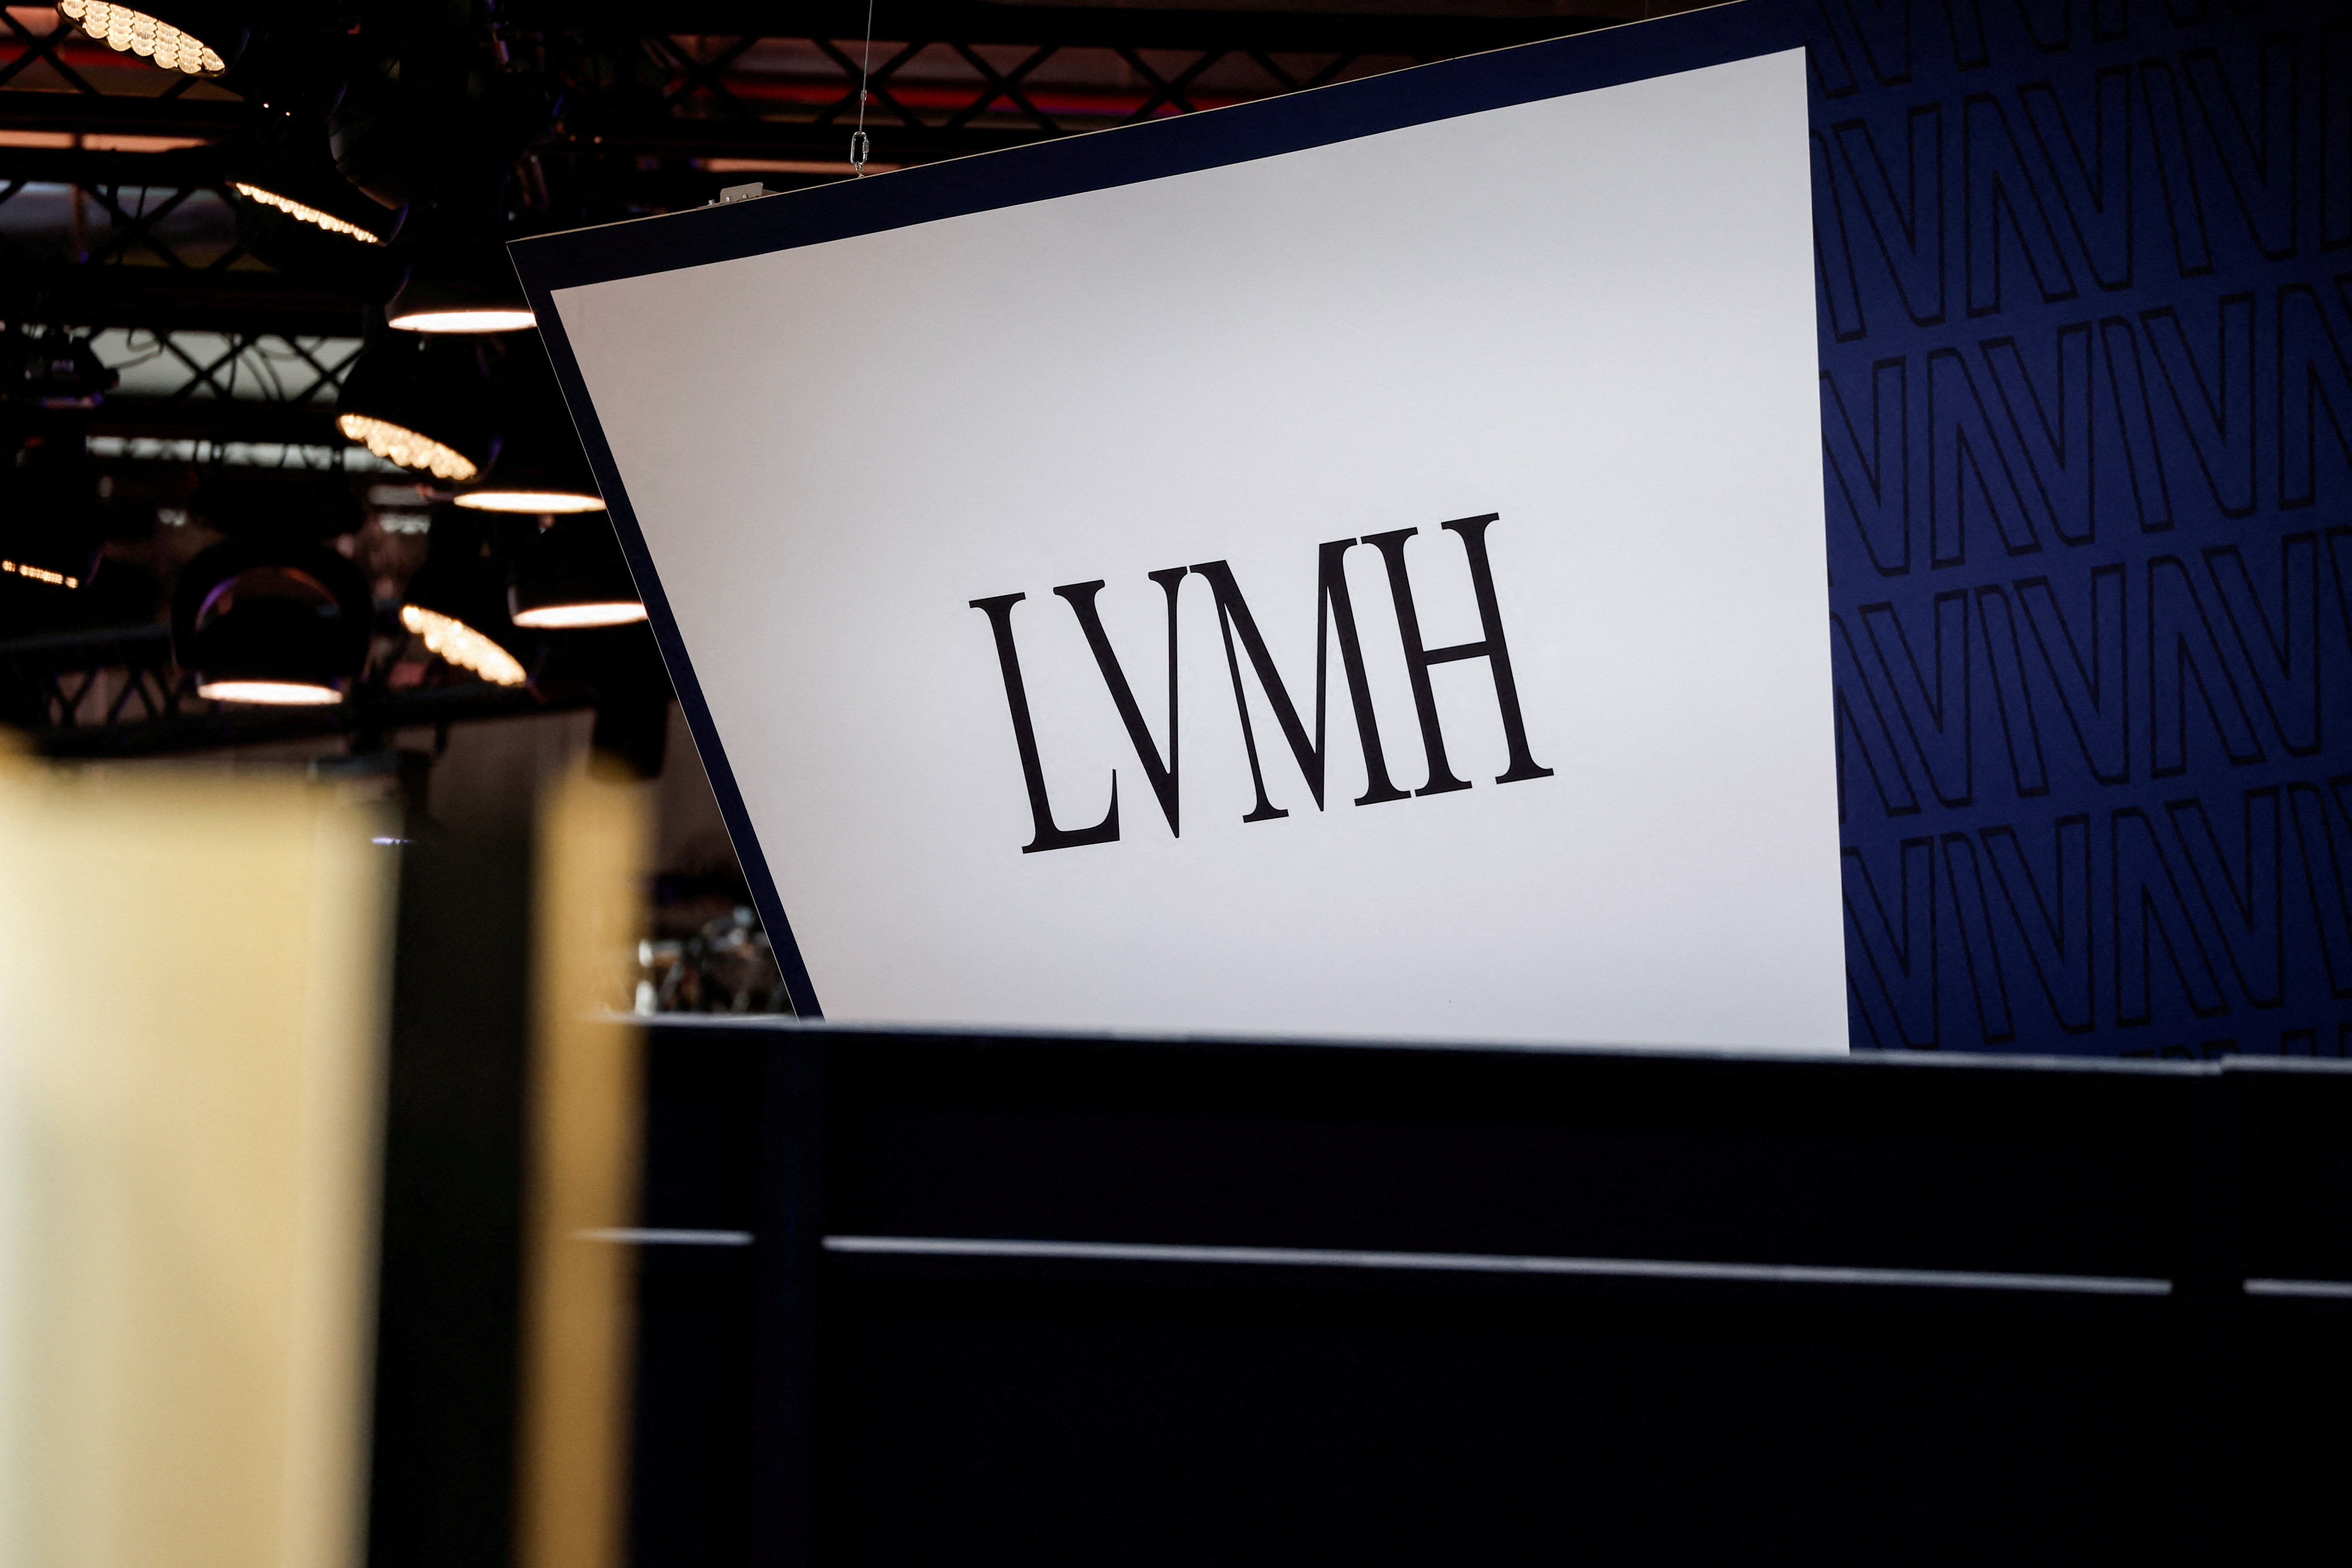 LVMH: The Reigning Icon And Epitome Of Global Luxury